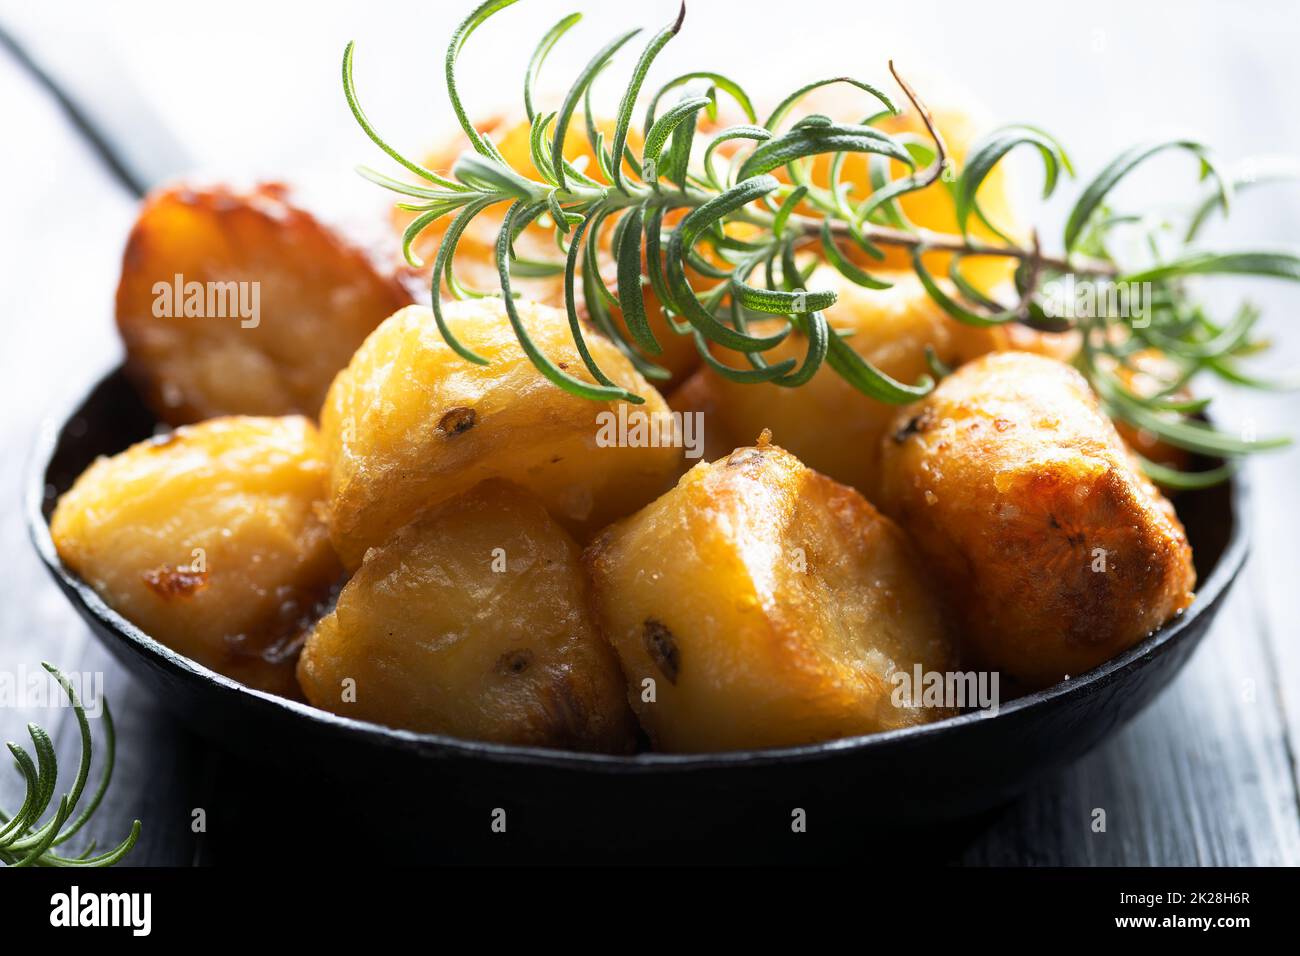 rustic golden english roasted duck fat potatoes Stock Photo